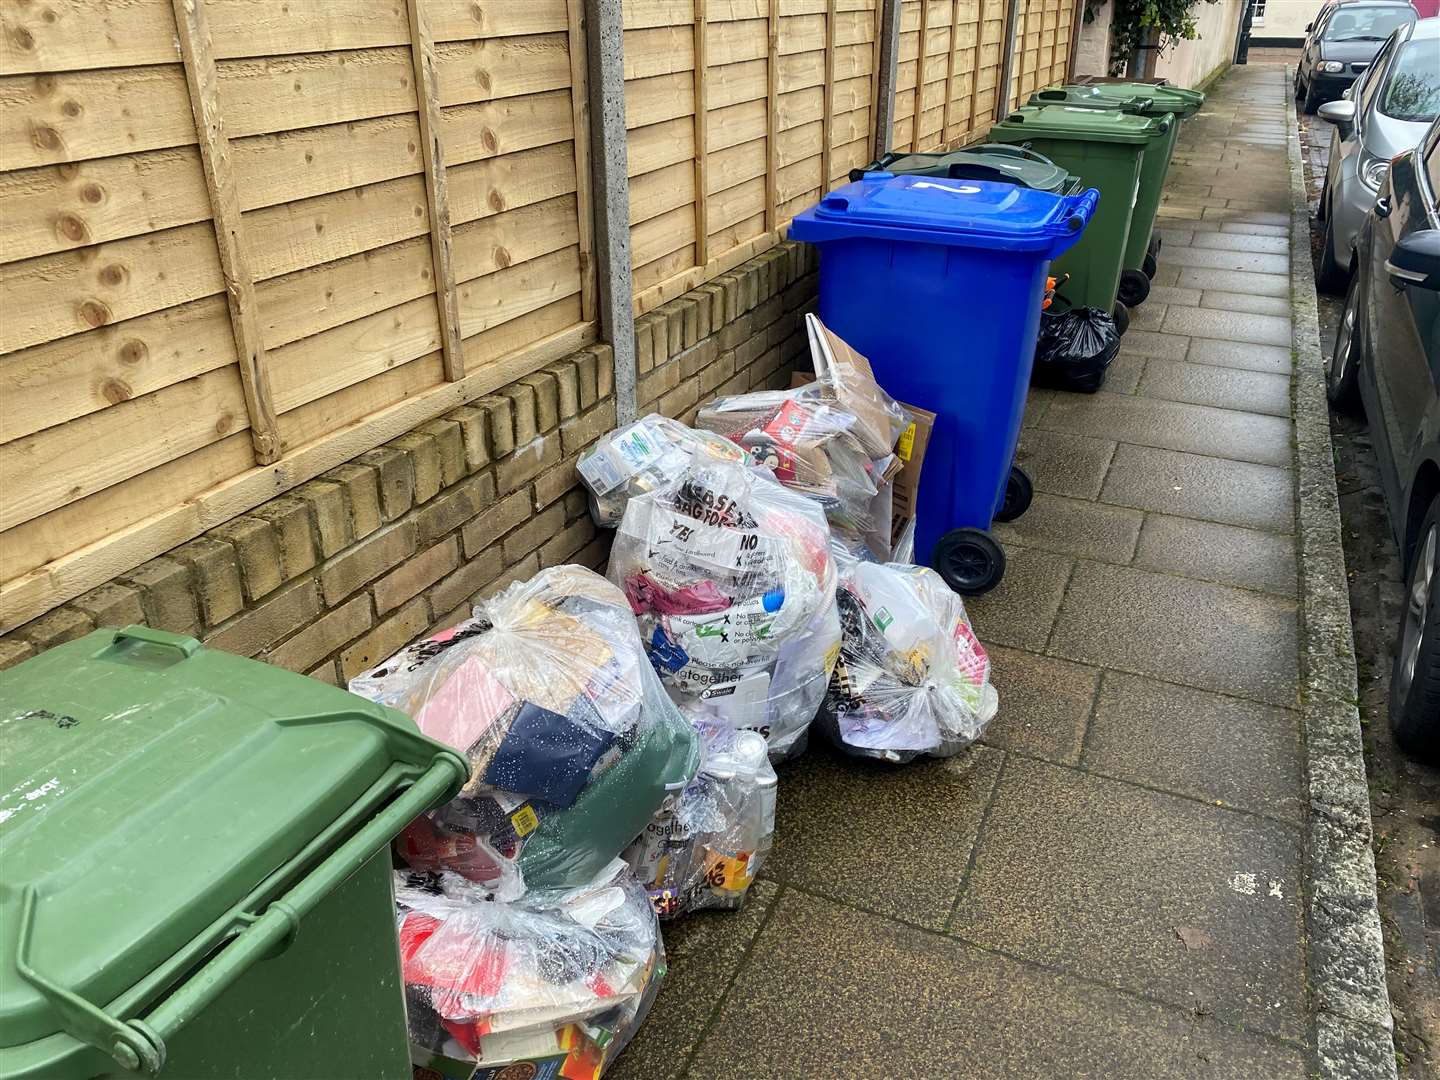 Elsewhere in Faversham, overflowing rubbish is becoming an issue